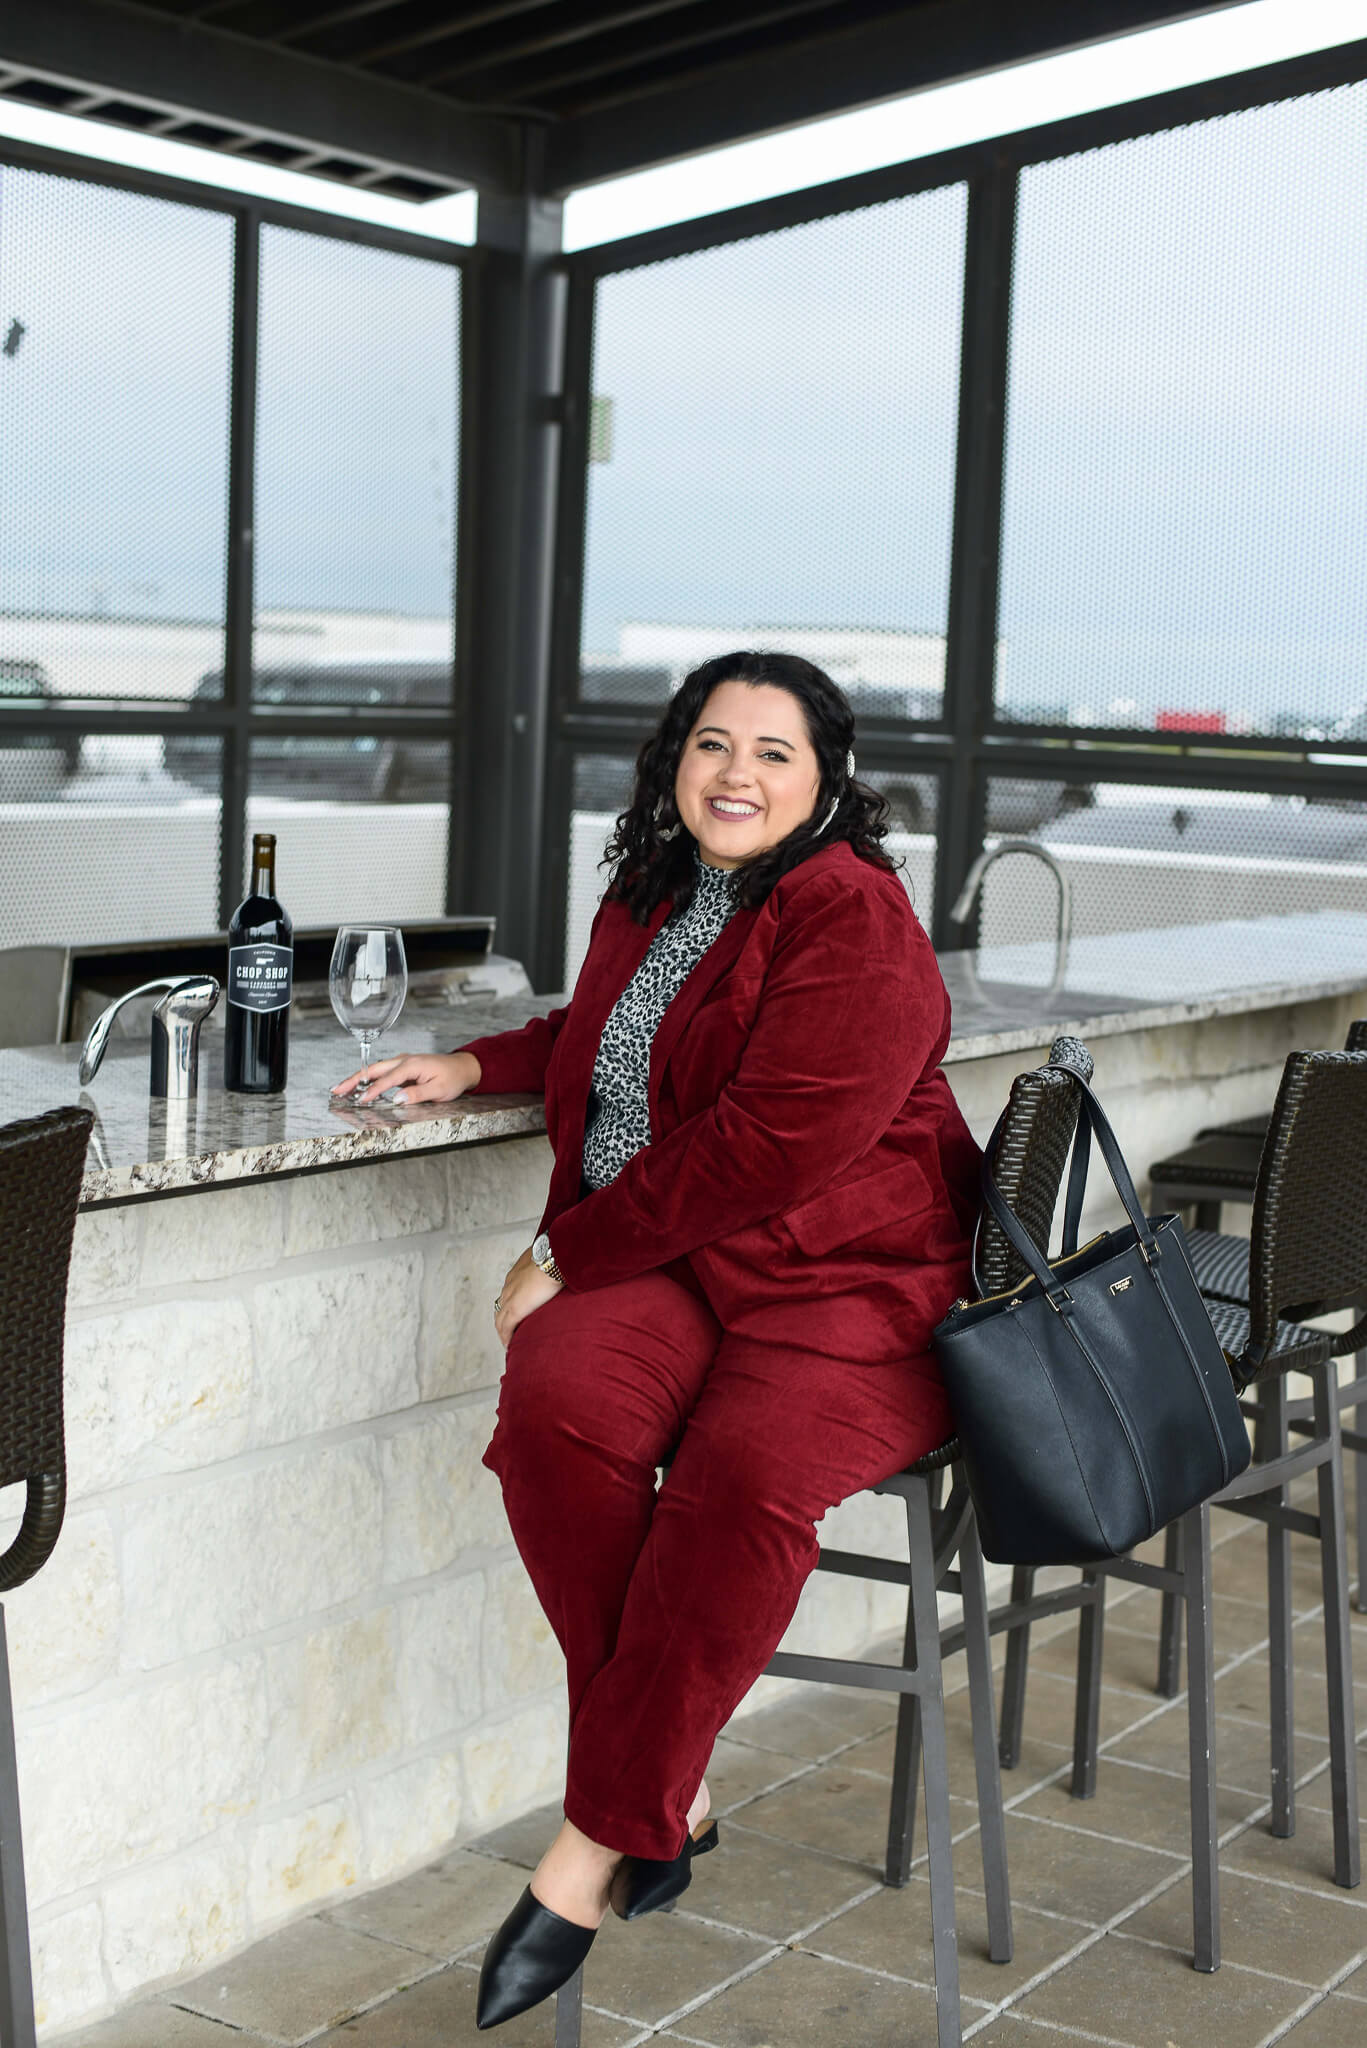 After a long day of work, it's so great to grab a glass of wine with friends to unwind. I'm sharing how to style this velvet suit which is appropriate for work or play.